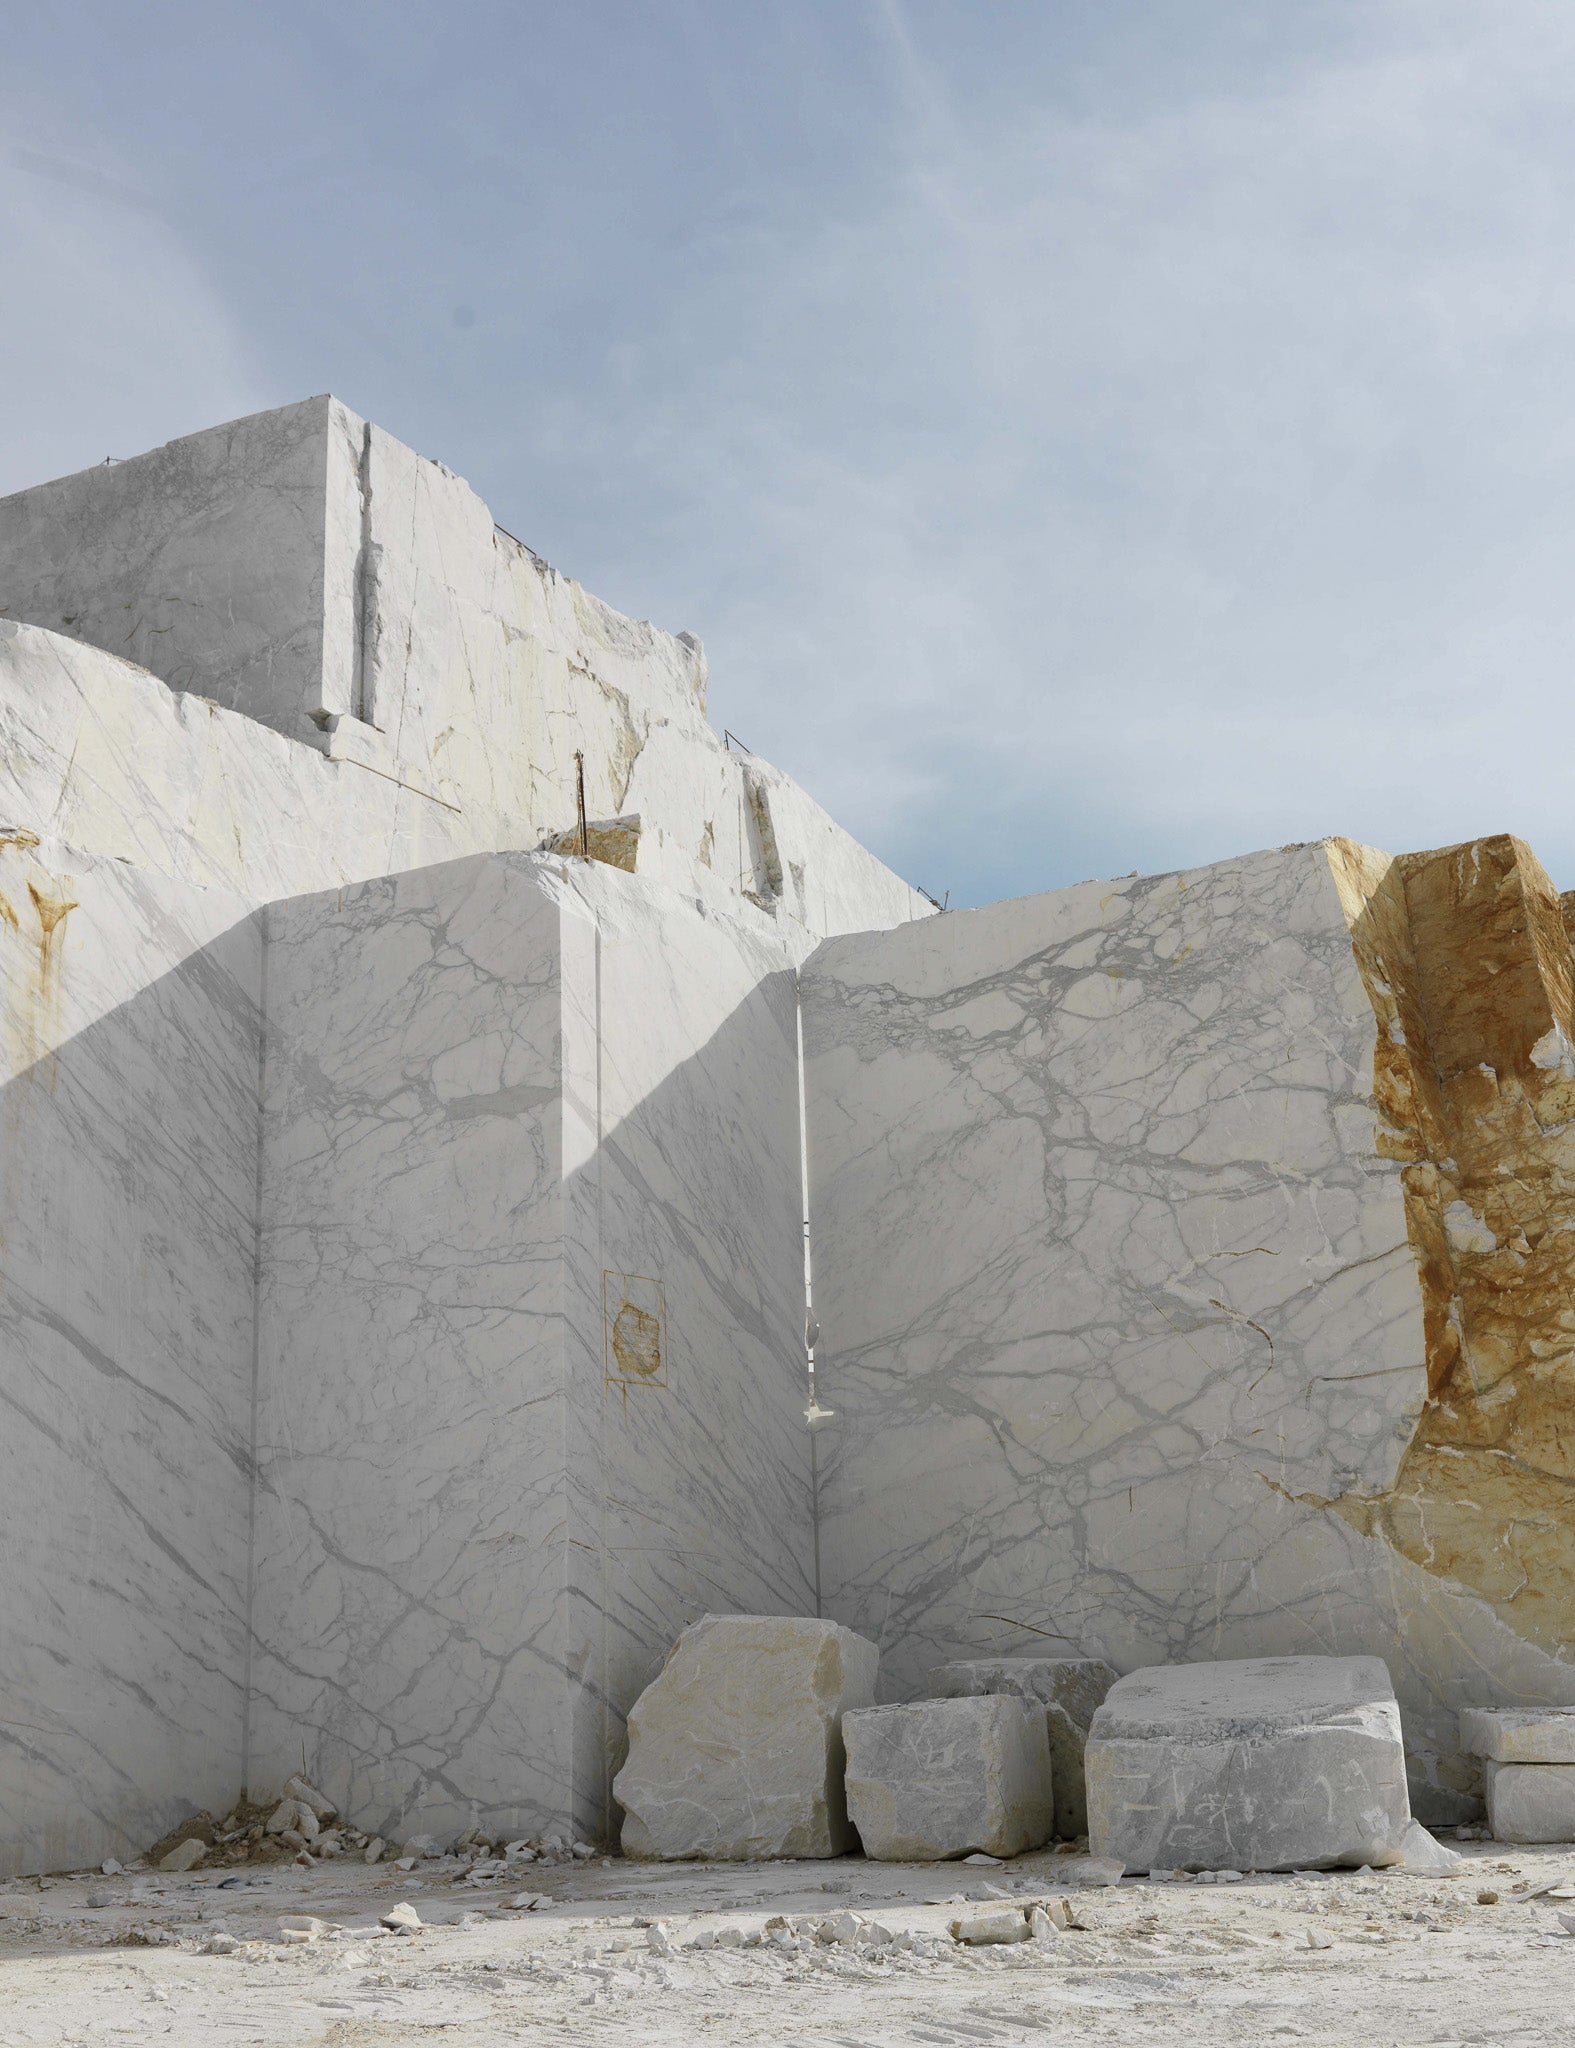 The history and artistry behind marble craftsmanship